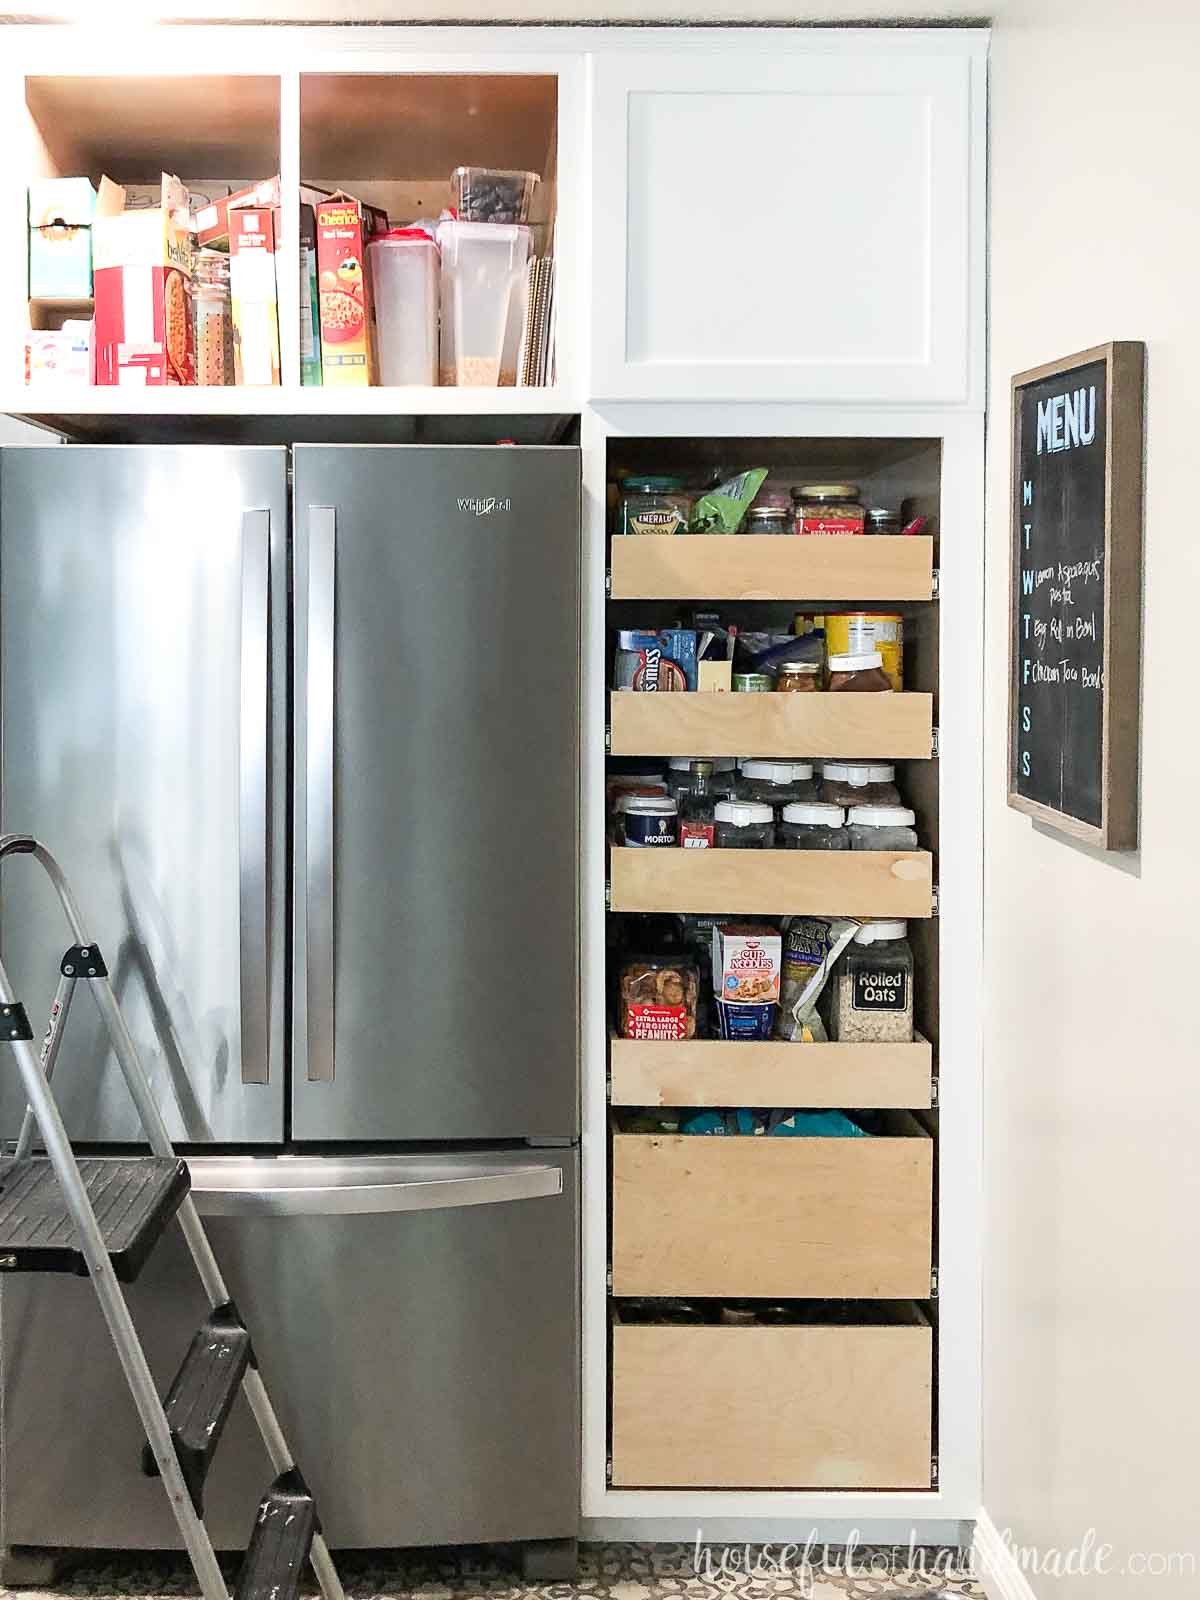 24" pantry cabinet with 6 pull out drawers inside it.